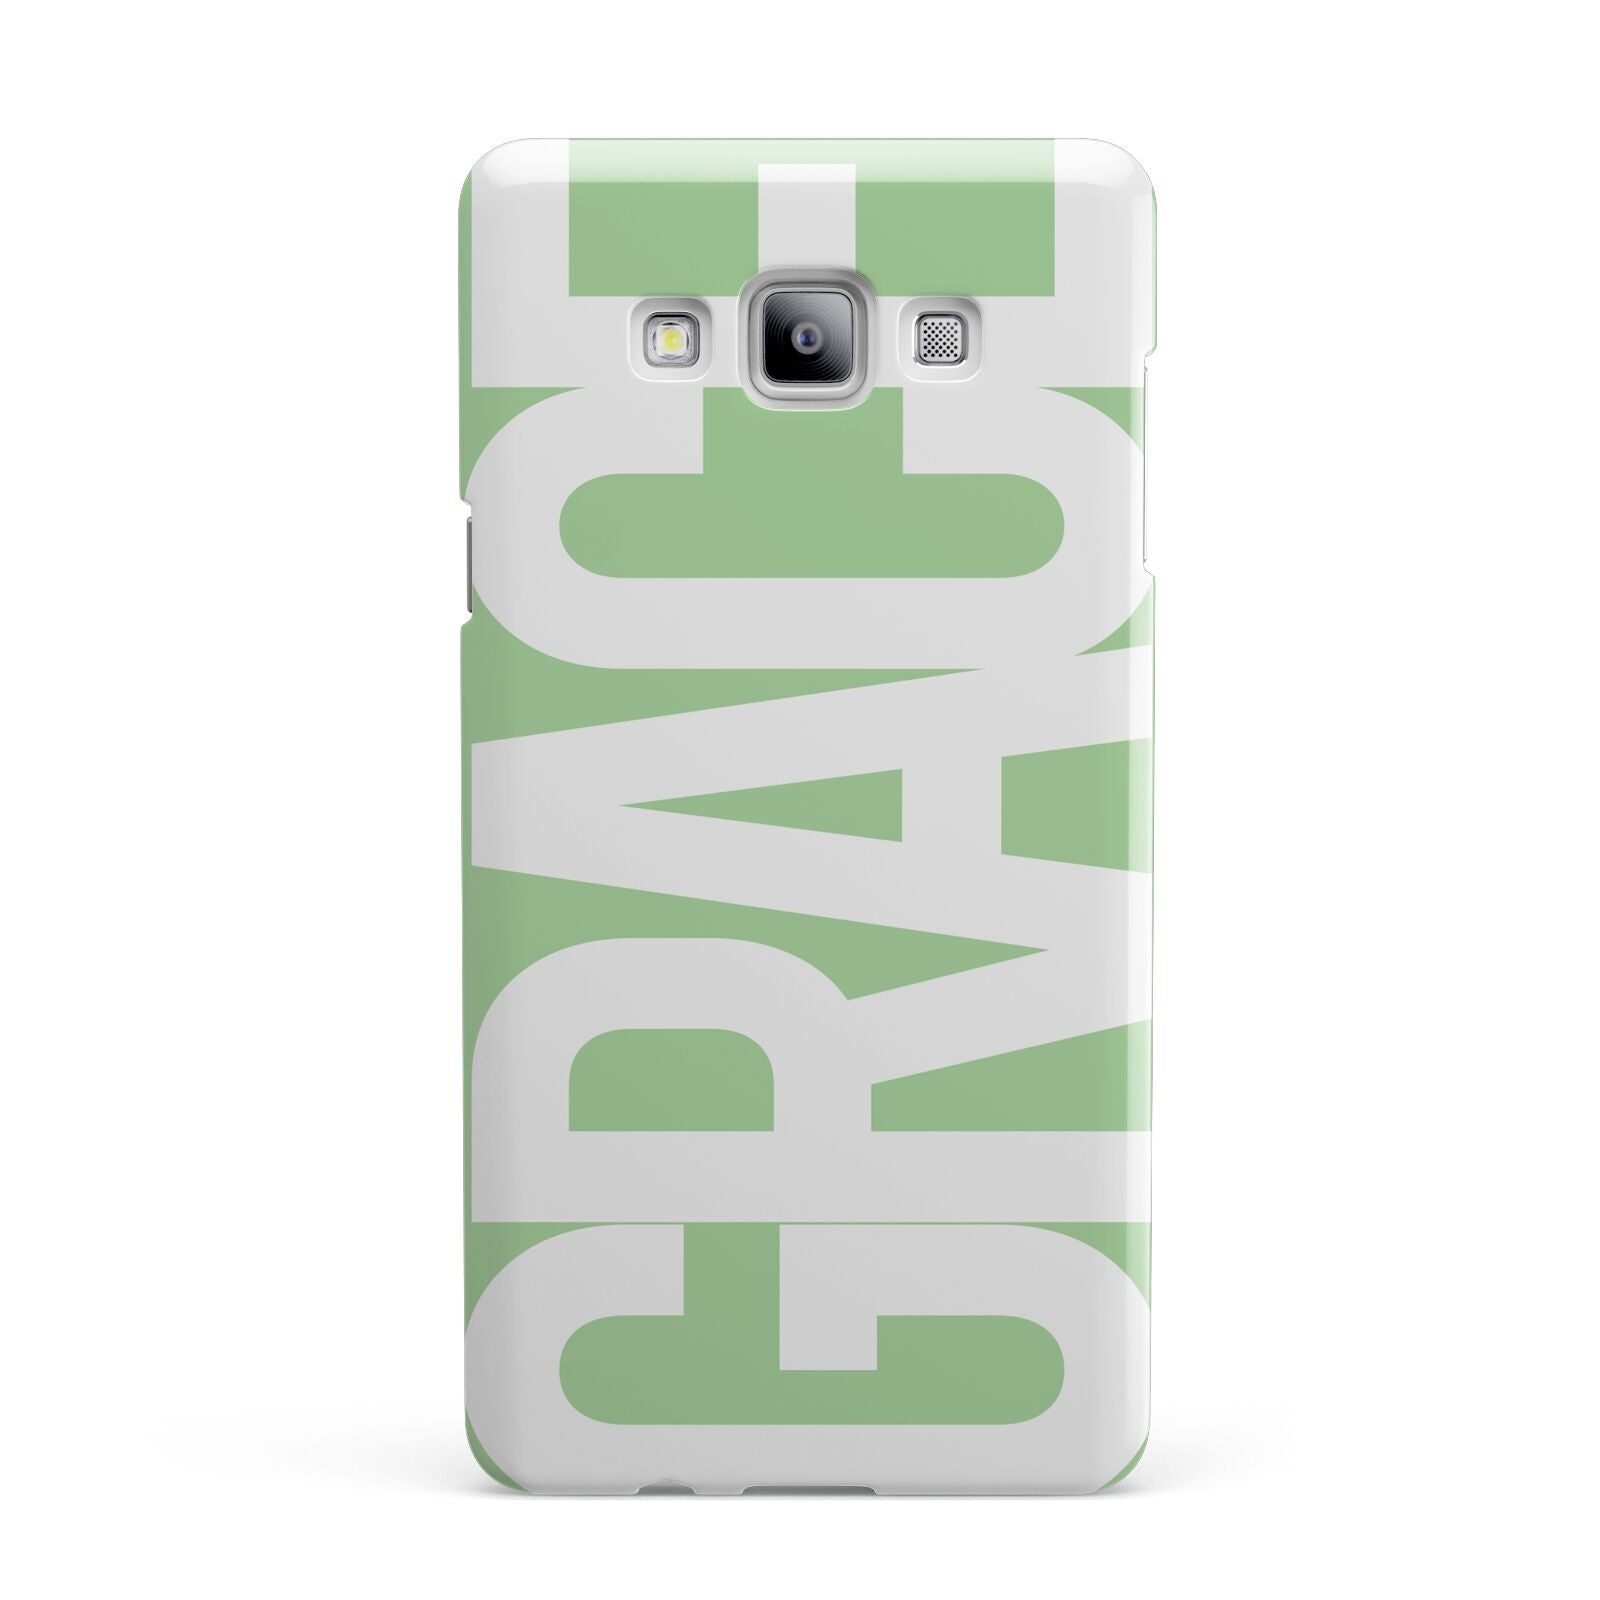 Pale Green with Bold White Text Samsung Galaxy A7 2015 Case